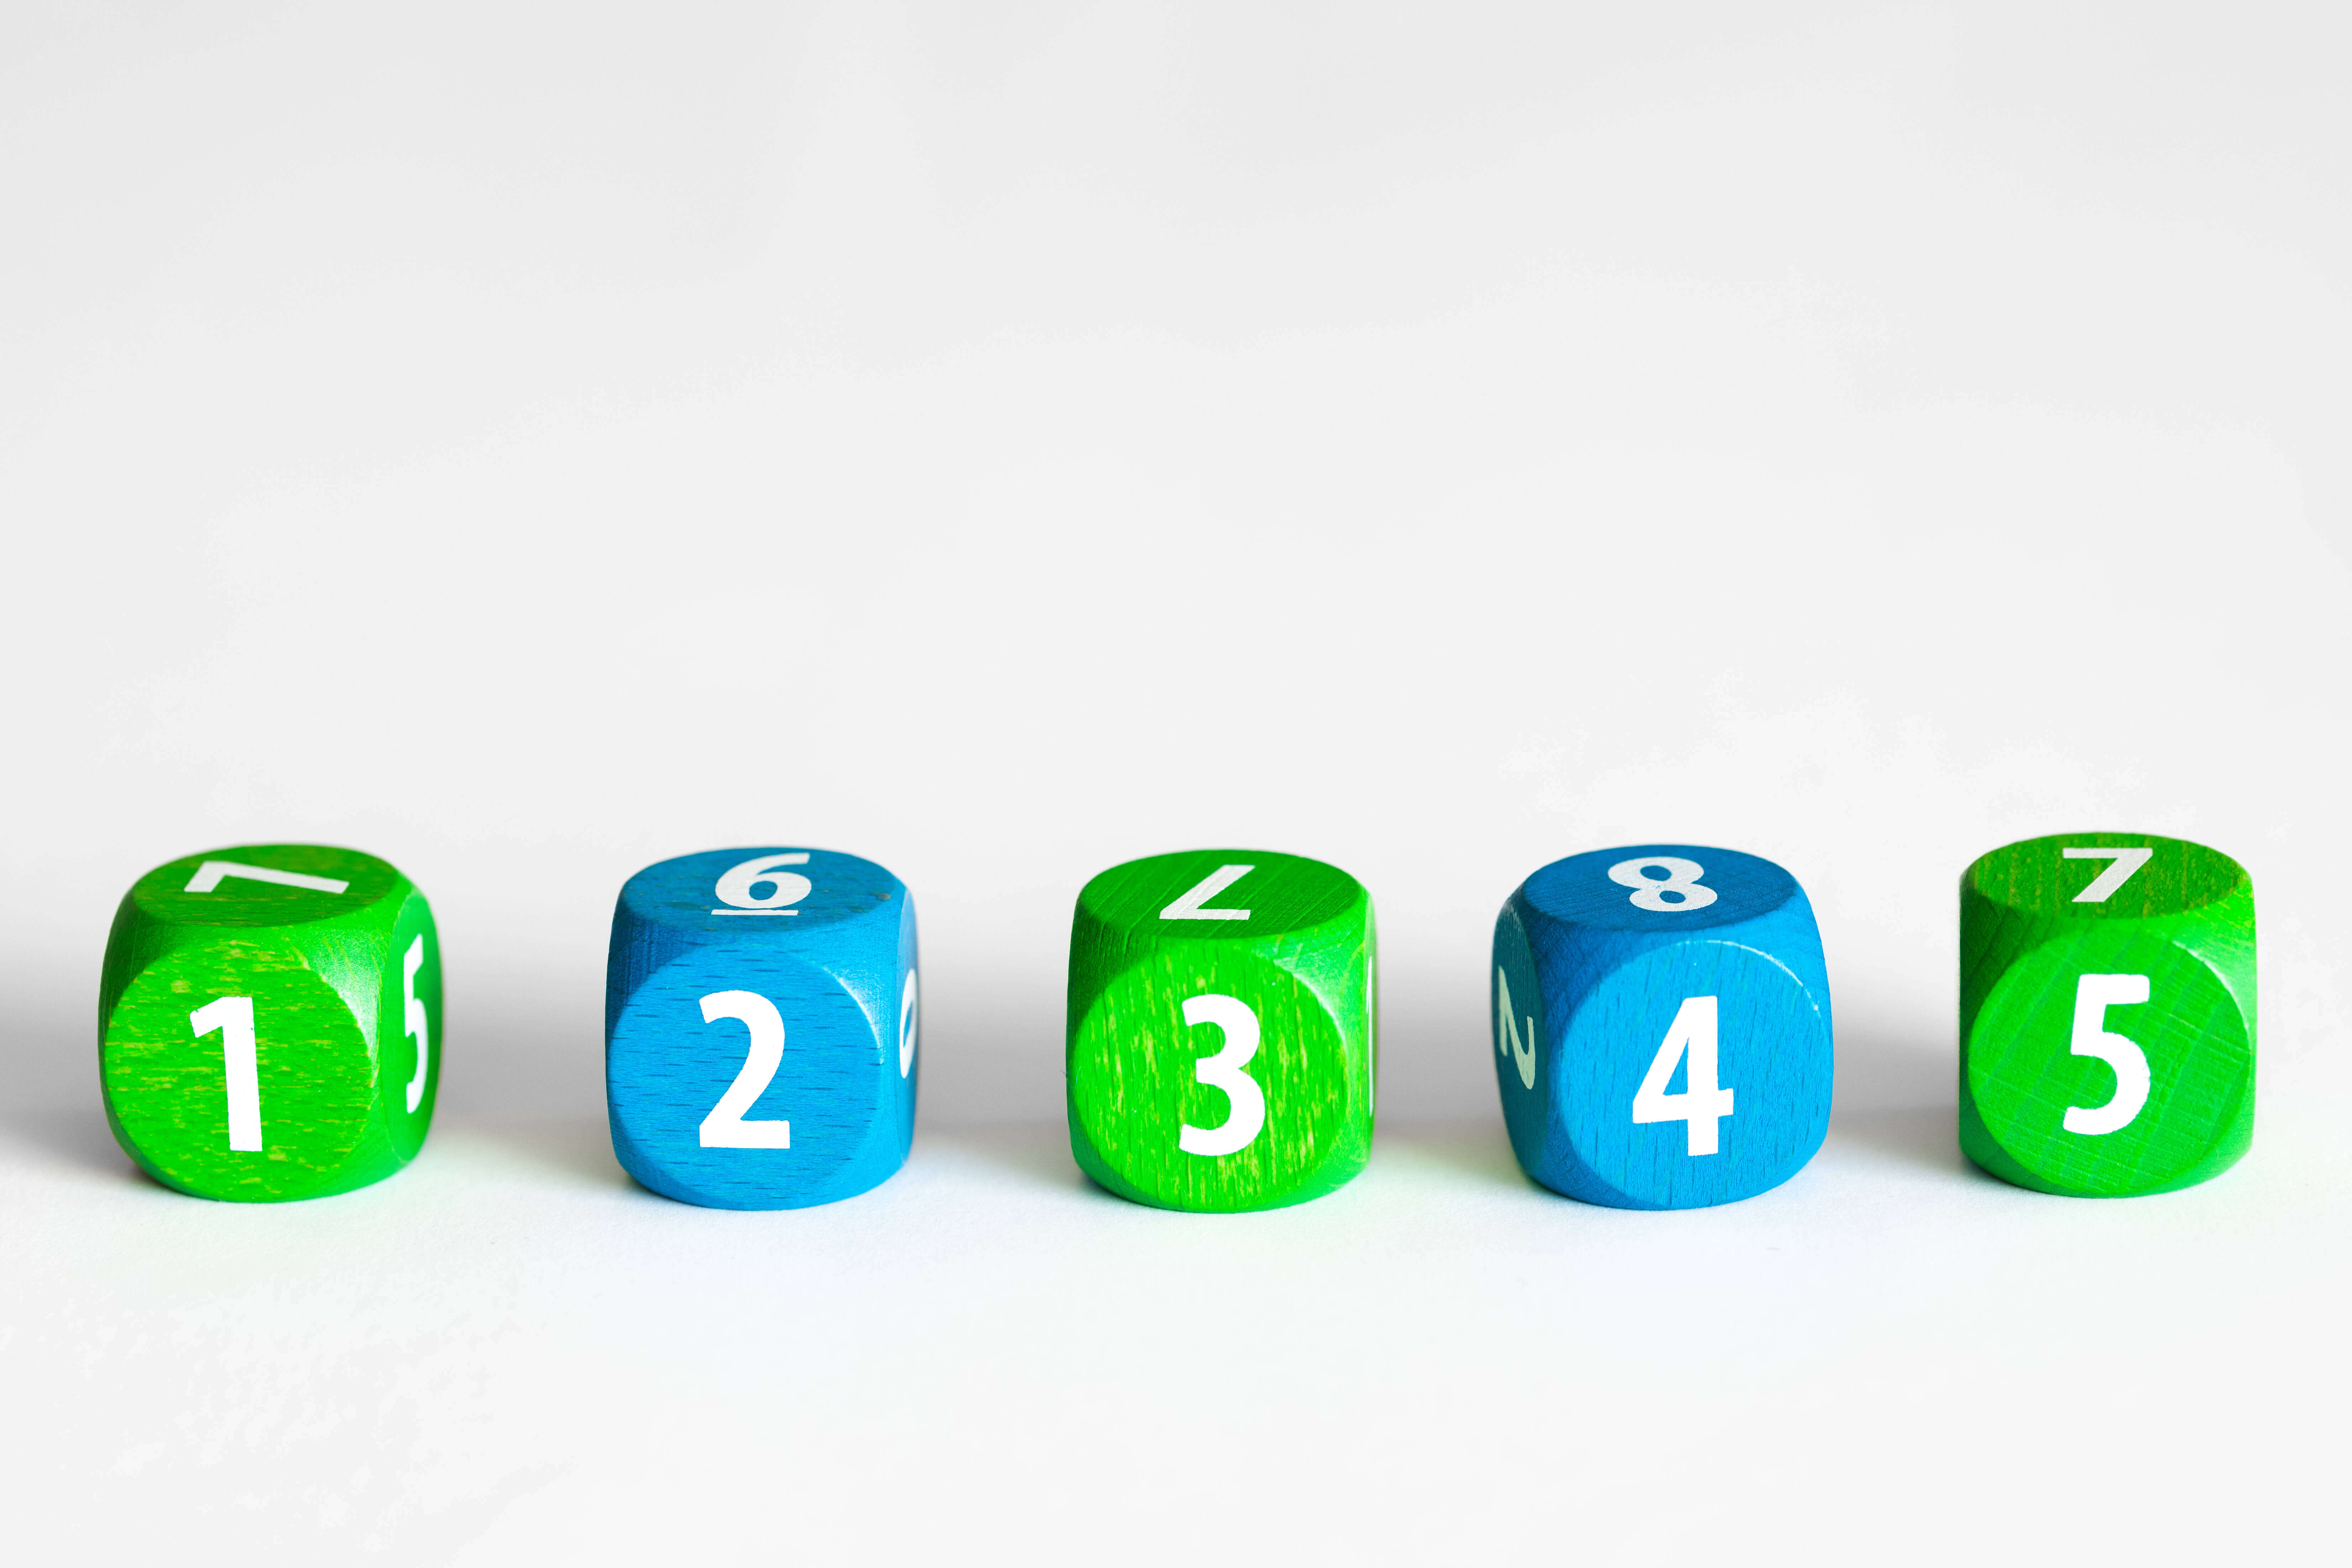 Take a trip around the board after rolling the numbered blue and green dice